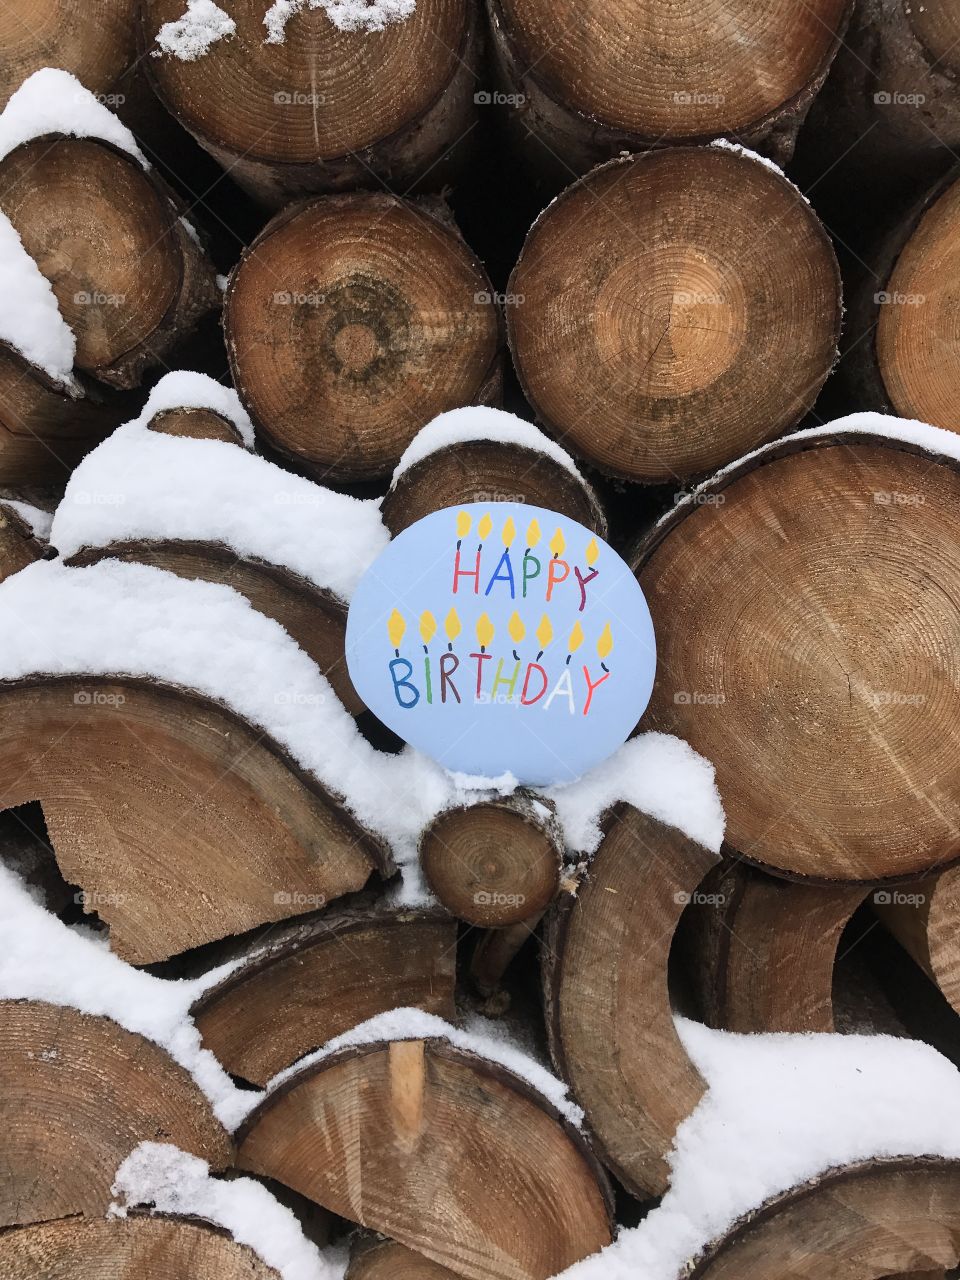 Happy Birthday on a stone with cutted trunks background